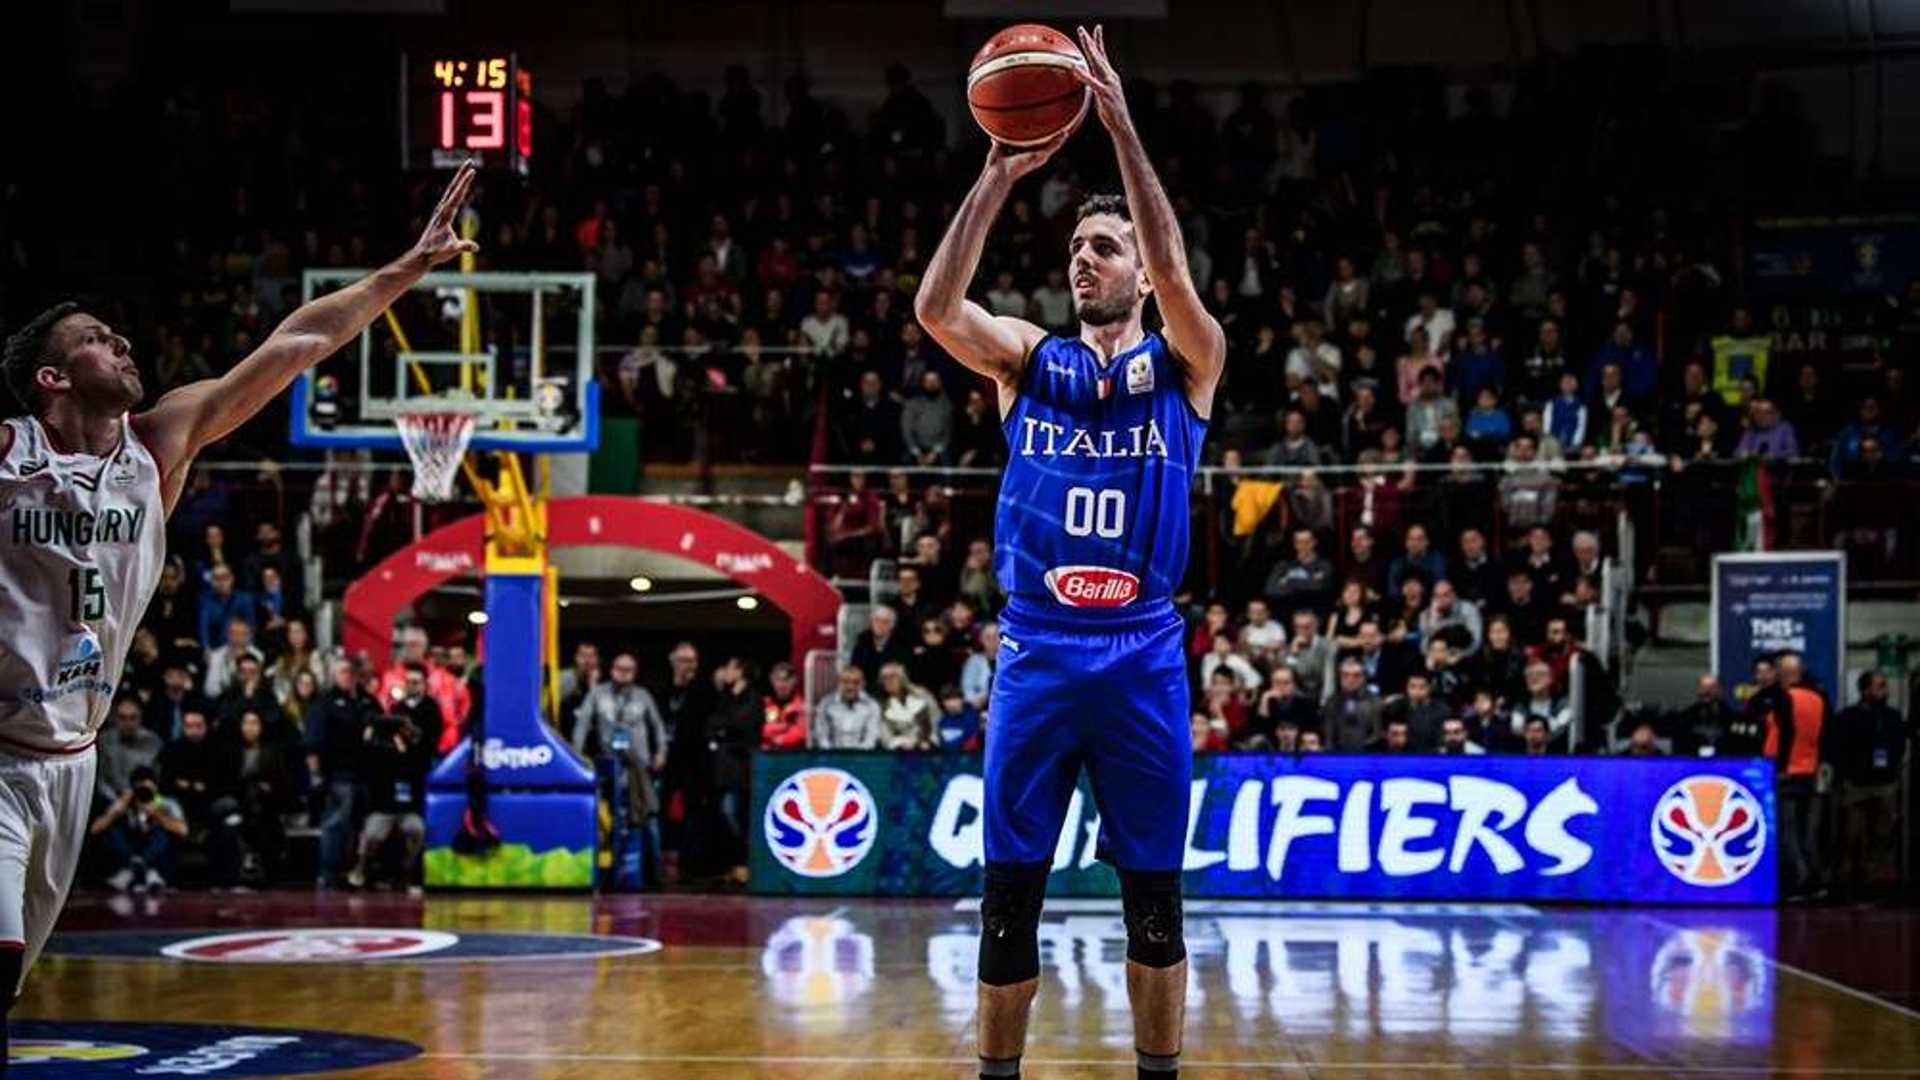 The EuroBasket 2022 Group C match between Great Britain vs Italy will be held at Forum di Assago on September 8 at 9:00 PM (International time), and September 9, 12:30 AM (Indian time).